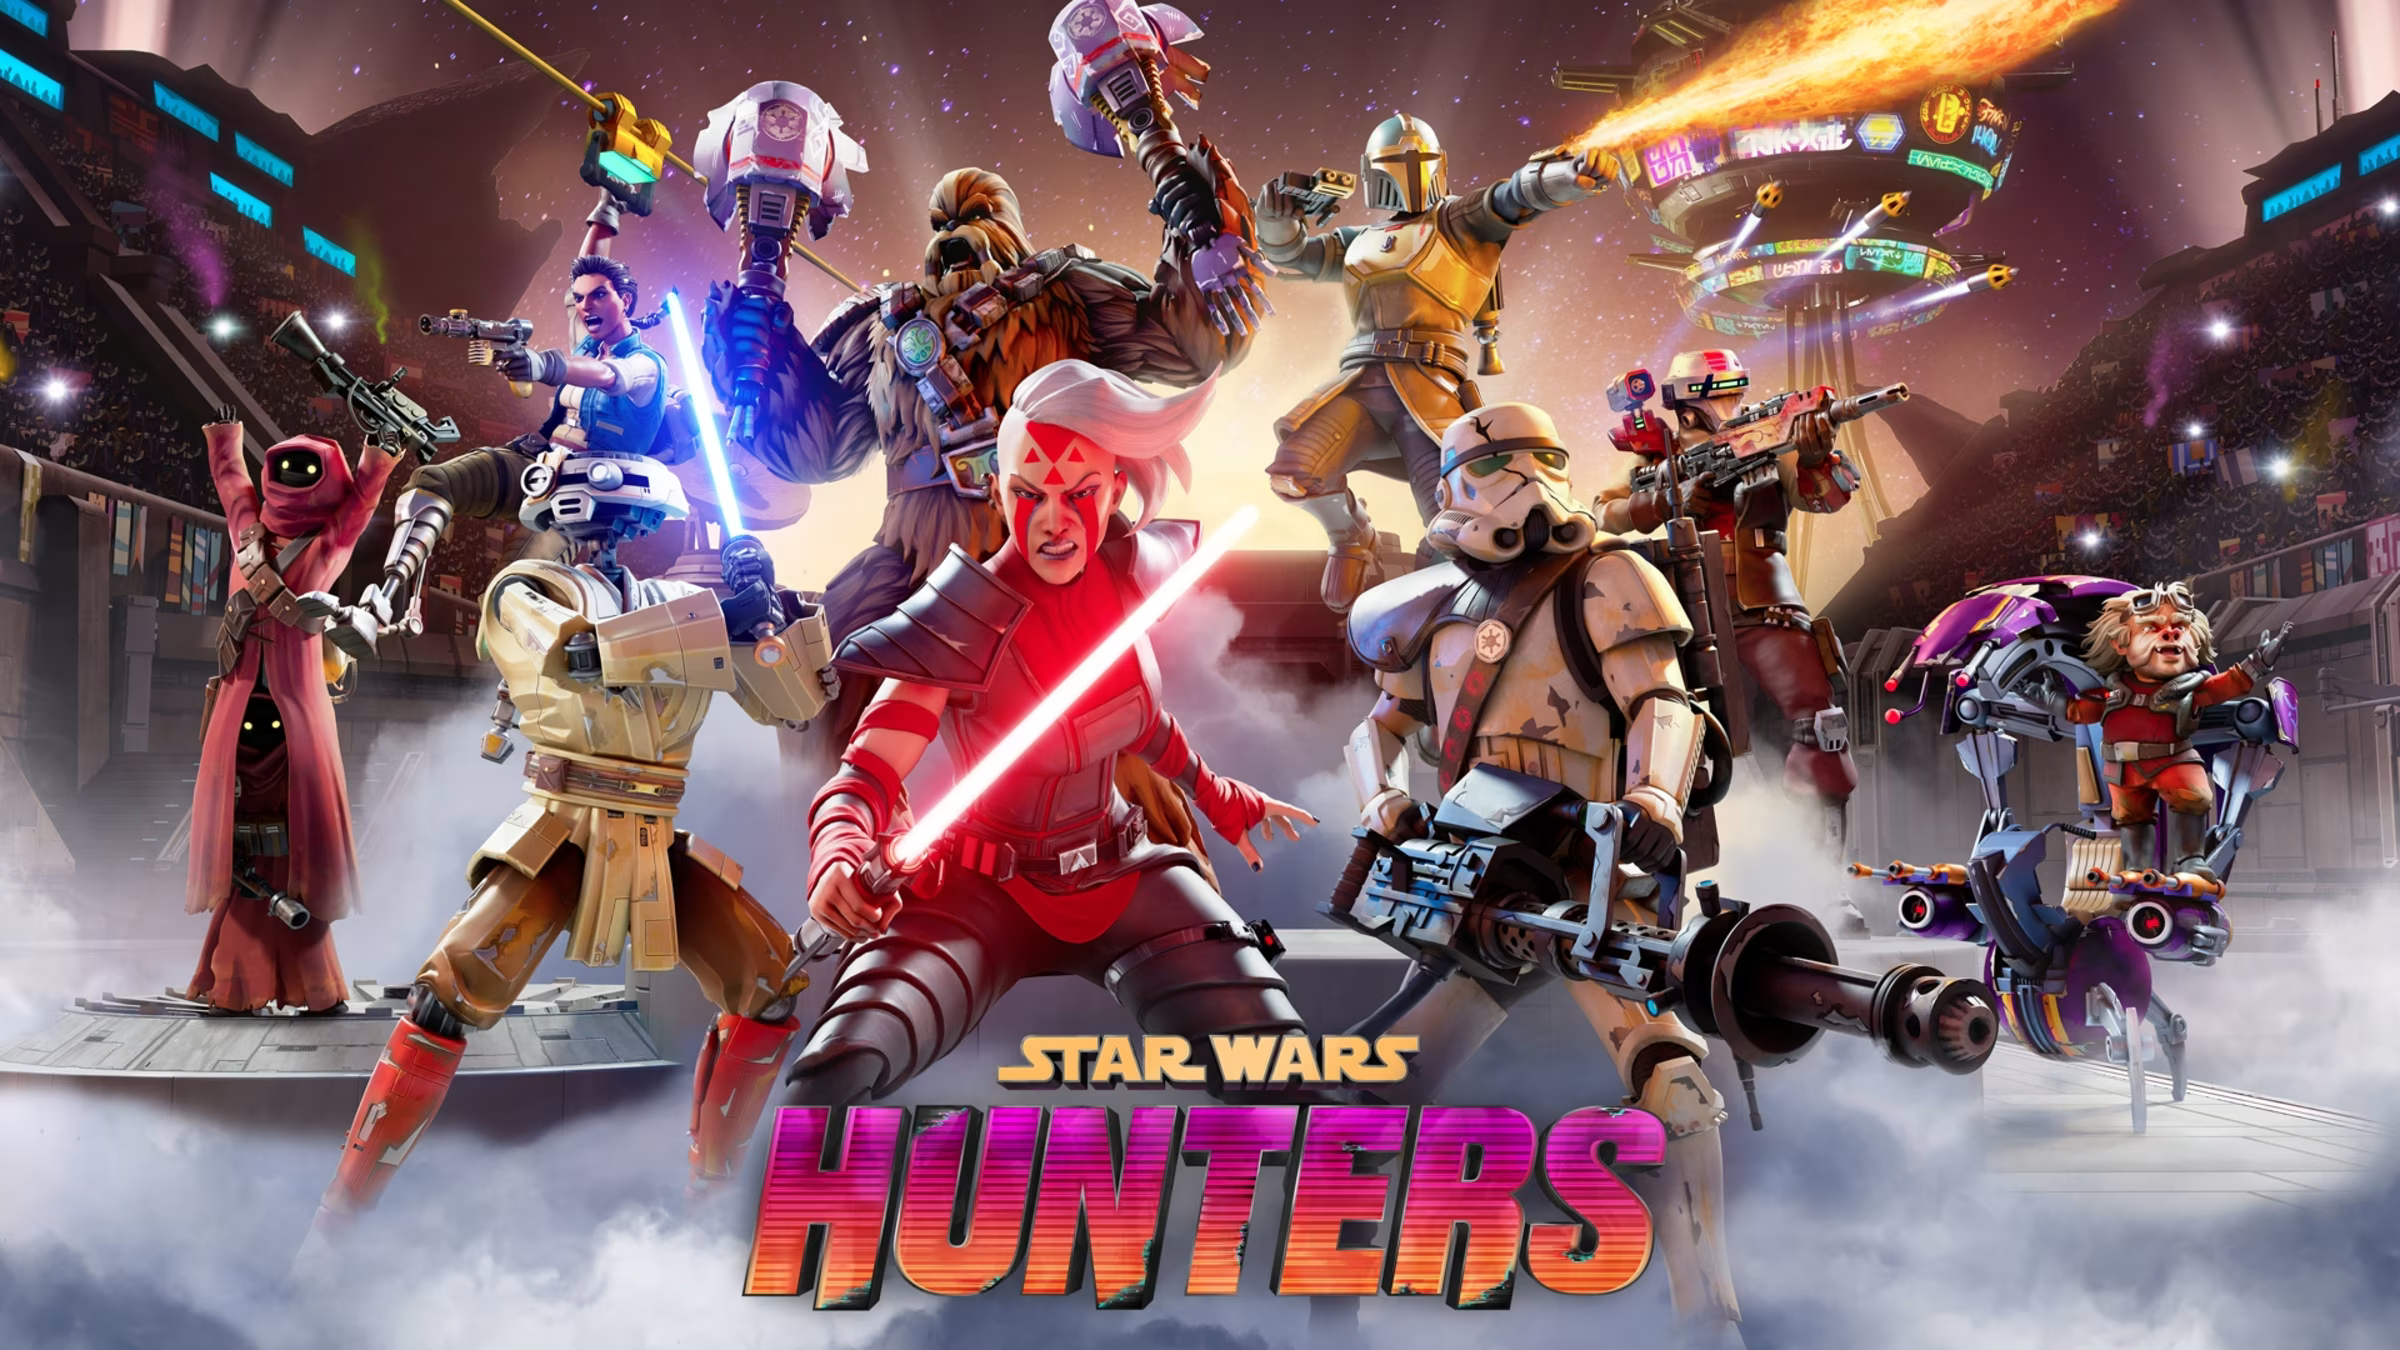 The mobile shooter Star Wars: Hunters has an official release date - 4 June